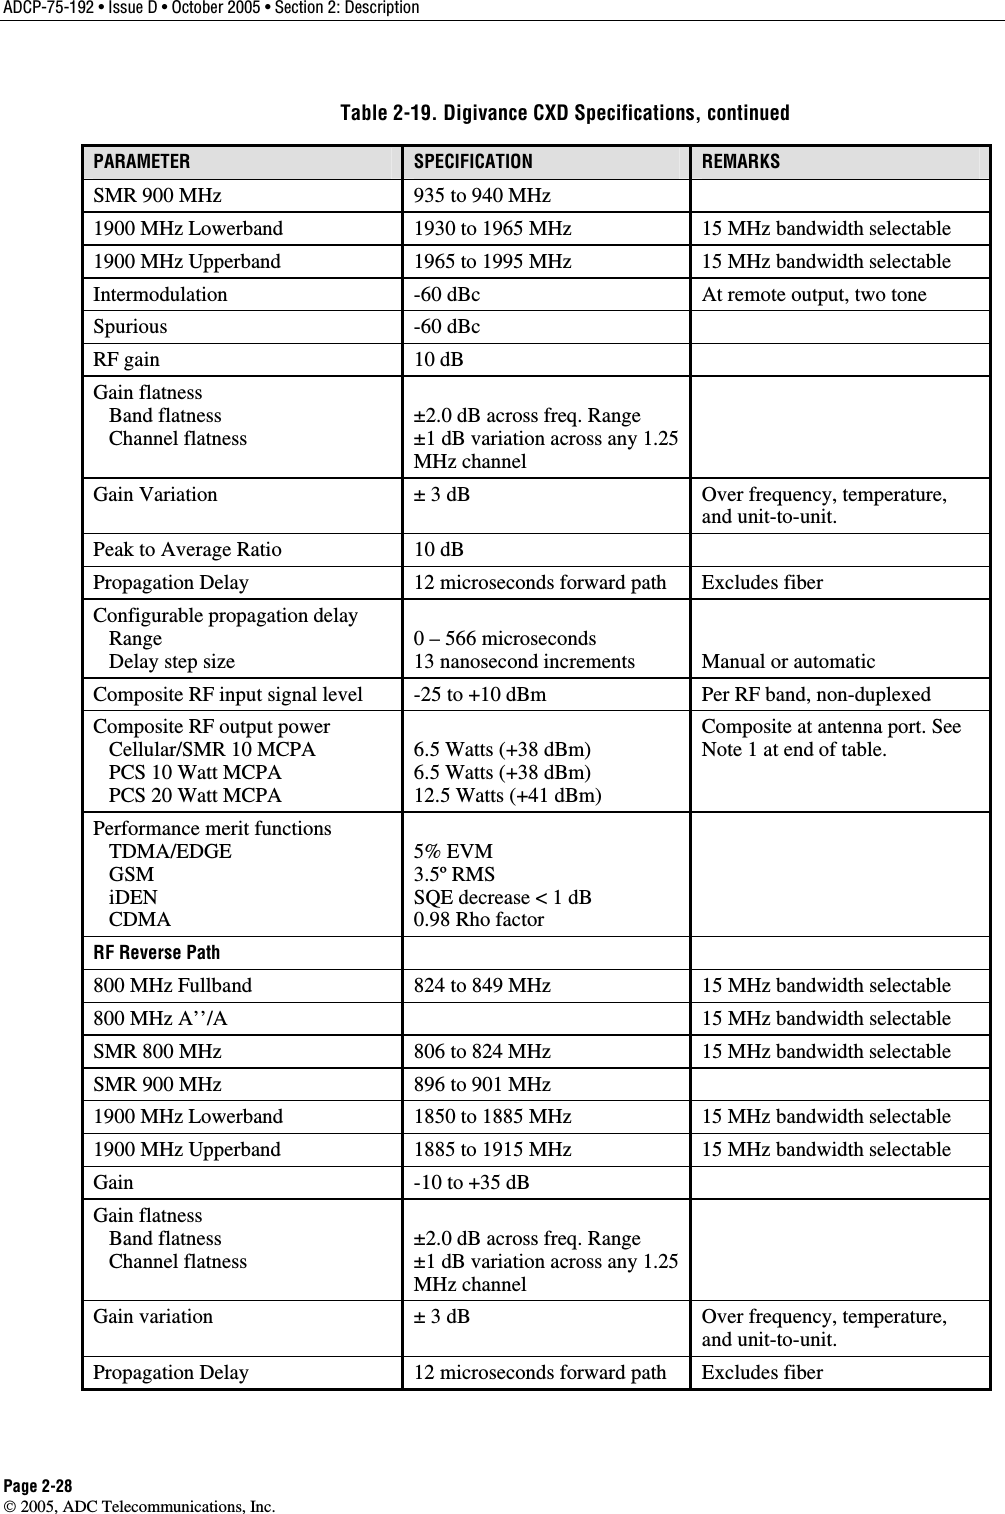 ADCP-75-192 • Issue D • October 2005 • Section 2: Description Page 2-28  2005, ADC Telecommunications, Inc. Table 2-19. Digivance CXD Specifications, continued PARAMETER  SPECIFICATION  REMARKS SMR 900 MHz  935 to 940 MHz   1900 MHz Lowerband  1930 to 1965 MHz  15 MHz bandwidth selectable 1900 MHz Upperband  1965 to 1995 MHz  15 MHz bandwidth selectable Intermodulation  -60 dBc  At remote output, two tone Spurious -60 dBc  RF gain   10 dB   Gain flatness    Band flatness    Channel flatness  ±2.0 dB across freq. Range ±1 dB variation across any 1.25 MHz channel  Gain Variation  ± 3 dB  Over frequency, temperature, and unit-to-unit.  Peak to Average Ratio  10 dB   Propagation Delay  12 microseconds forward path  Excludes fiber Configurable propagation delay    Range    Delay step size  0 – 566 microseconds 13 nanosecond increments   Manual or automatic Composite RF input signal level  -25 to +10 dBm  Per RF band, non-duplexed Composite RF output power    Cellular/SMR 10 MCPA    PCS 10 Watt MCPA    PCS 20 Watt MCPA  6.5 Watts (+38 dBm) 6.5 Watts (+38 dBm) 12.5 Watts (+41 dBm) Composite at antenna port. See Note 1 at end of table.  Performance merit functions    TDMA/EDGE    GSM    iDEN    CDMA  5% EVM 3.5º RMS SQE decrease &lt; 1 dB 0.98 Rho factor  RF Reverse Path    800 MHz Fullband  824 to 849 MHz  15 MHz bandwidth selectable 800 MHz A’’/A    15 MHz bandwidth selectable SMR 800 MHz  806 to 824 MHz  15 MHz bandwidth selectable SMR 900 MHz  896 to 901 MHz   1900 MHz Lowerband  1850 to 1885 MHz  15 MHz bandwidth selectable 1900 MHz Upperband  1885 to 1915 MHz  15 MHz bandwidth selectable Gain  -10 to +35 dB   Gain flatness    Band flatness    Channel flatness  ±2.0 dB across freq. Range ±1 dB variation across any 1.25 MHz channel  Gain variation  ± 3 dB  Over frequency, temperature, and unit-to-unit.  Propagation Delay  12 microseconds forward path  Excludes fiber 